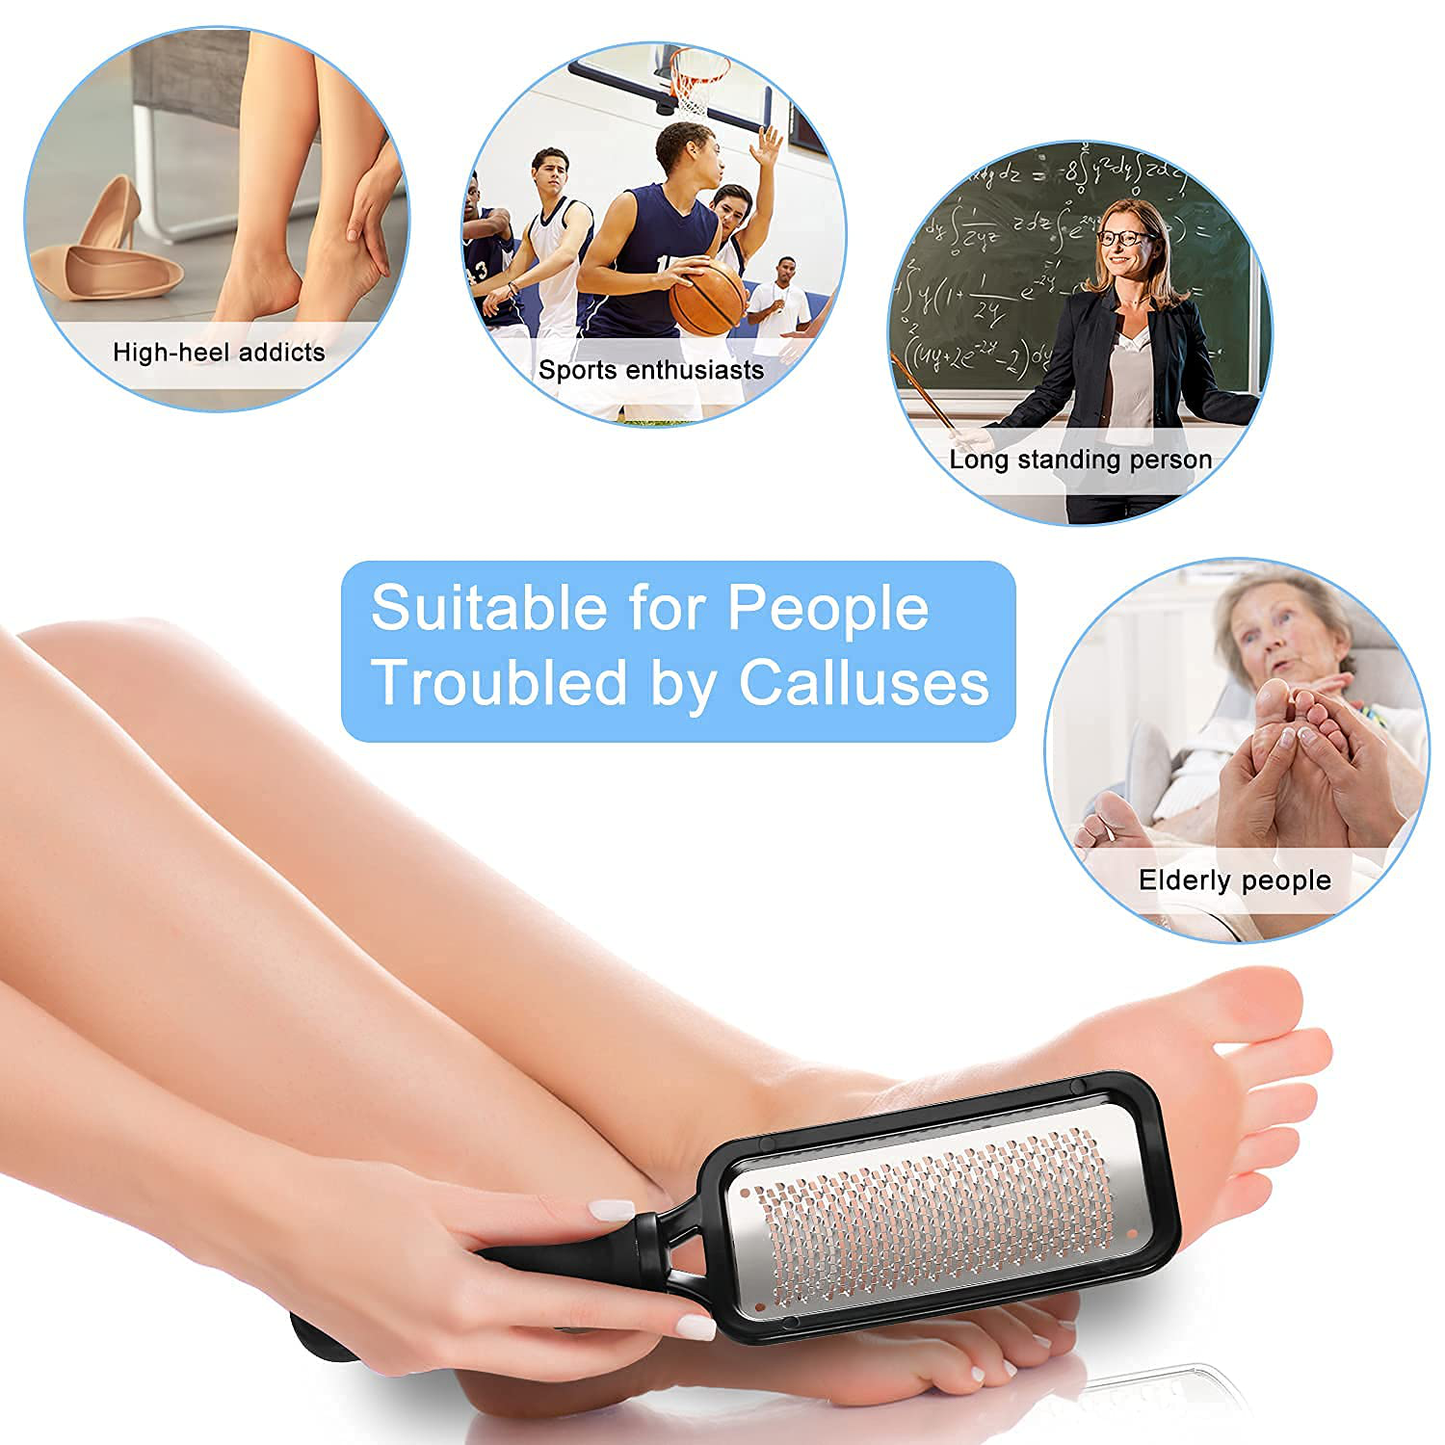 Foot Scrubber Callus Remover for Feet - Foot File Pedicure Tools Cozycom Colossal Foot Rasp Foot Grater Dead Skin Corn Callous Removers Professional Surgical Grade Stainless Steel for Dry and Wet Feet